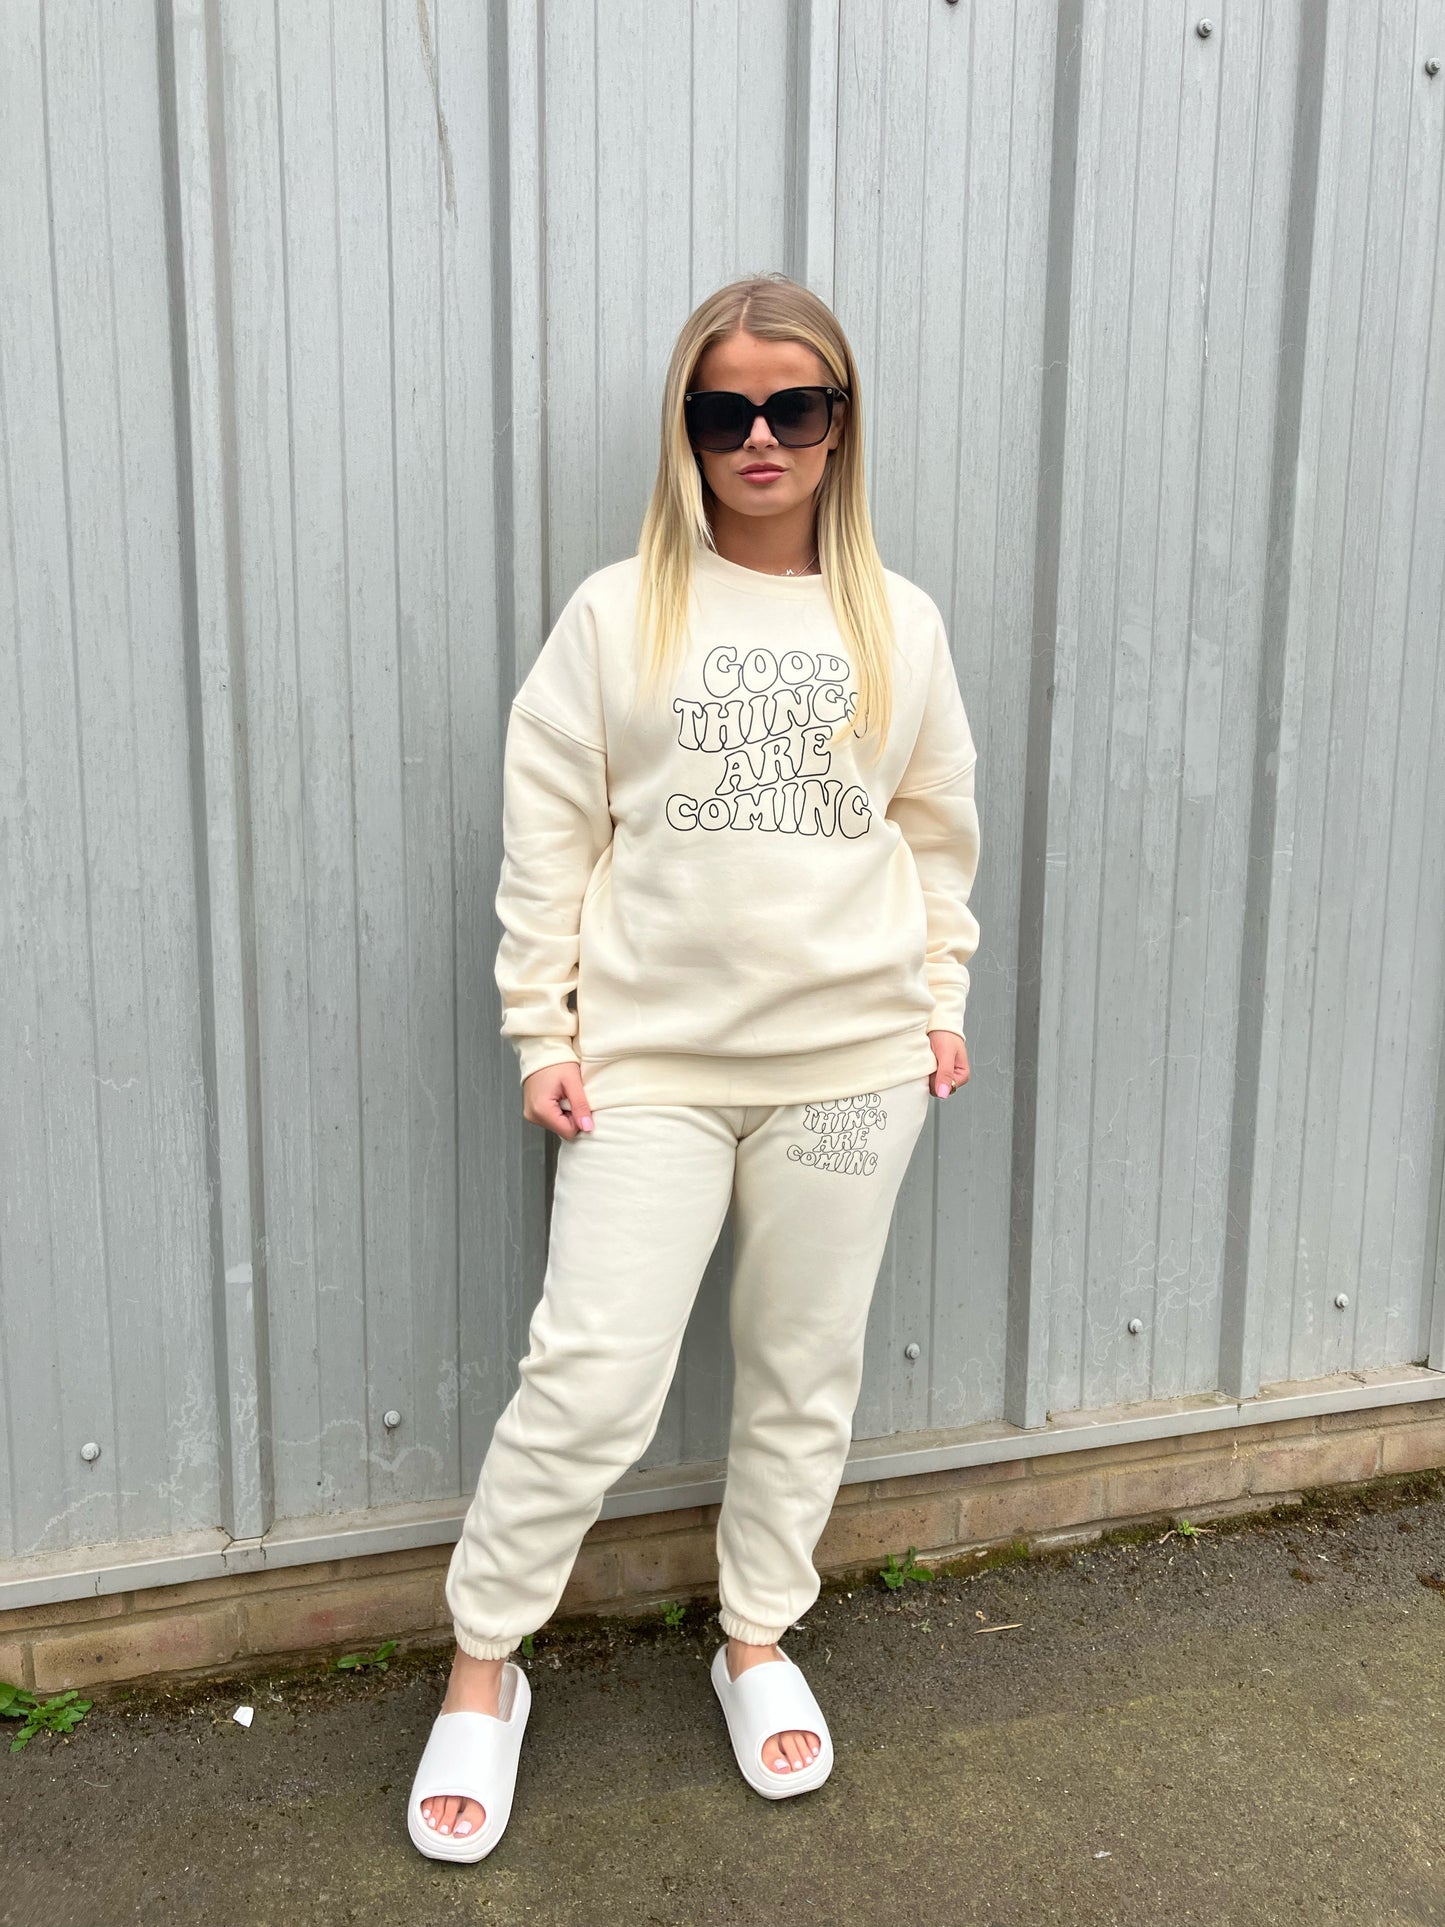 Good Things Are Coming Oversized Sweatshirt Tracksuit